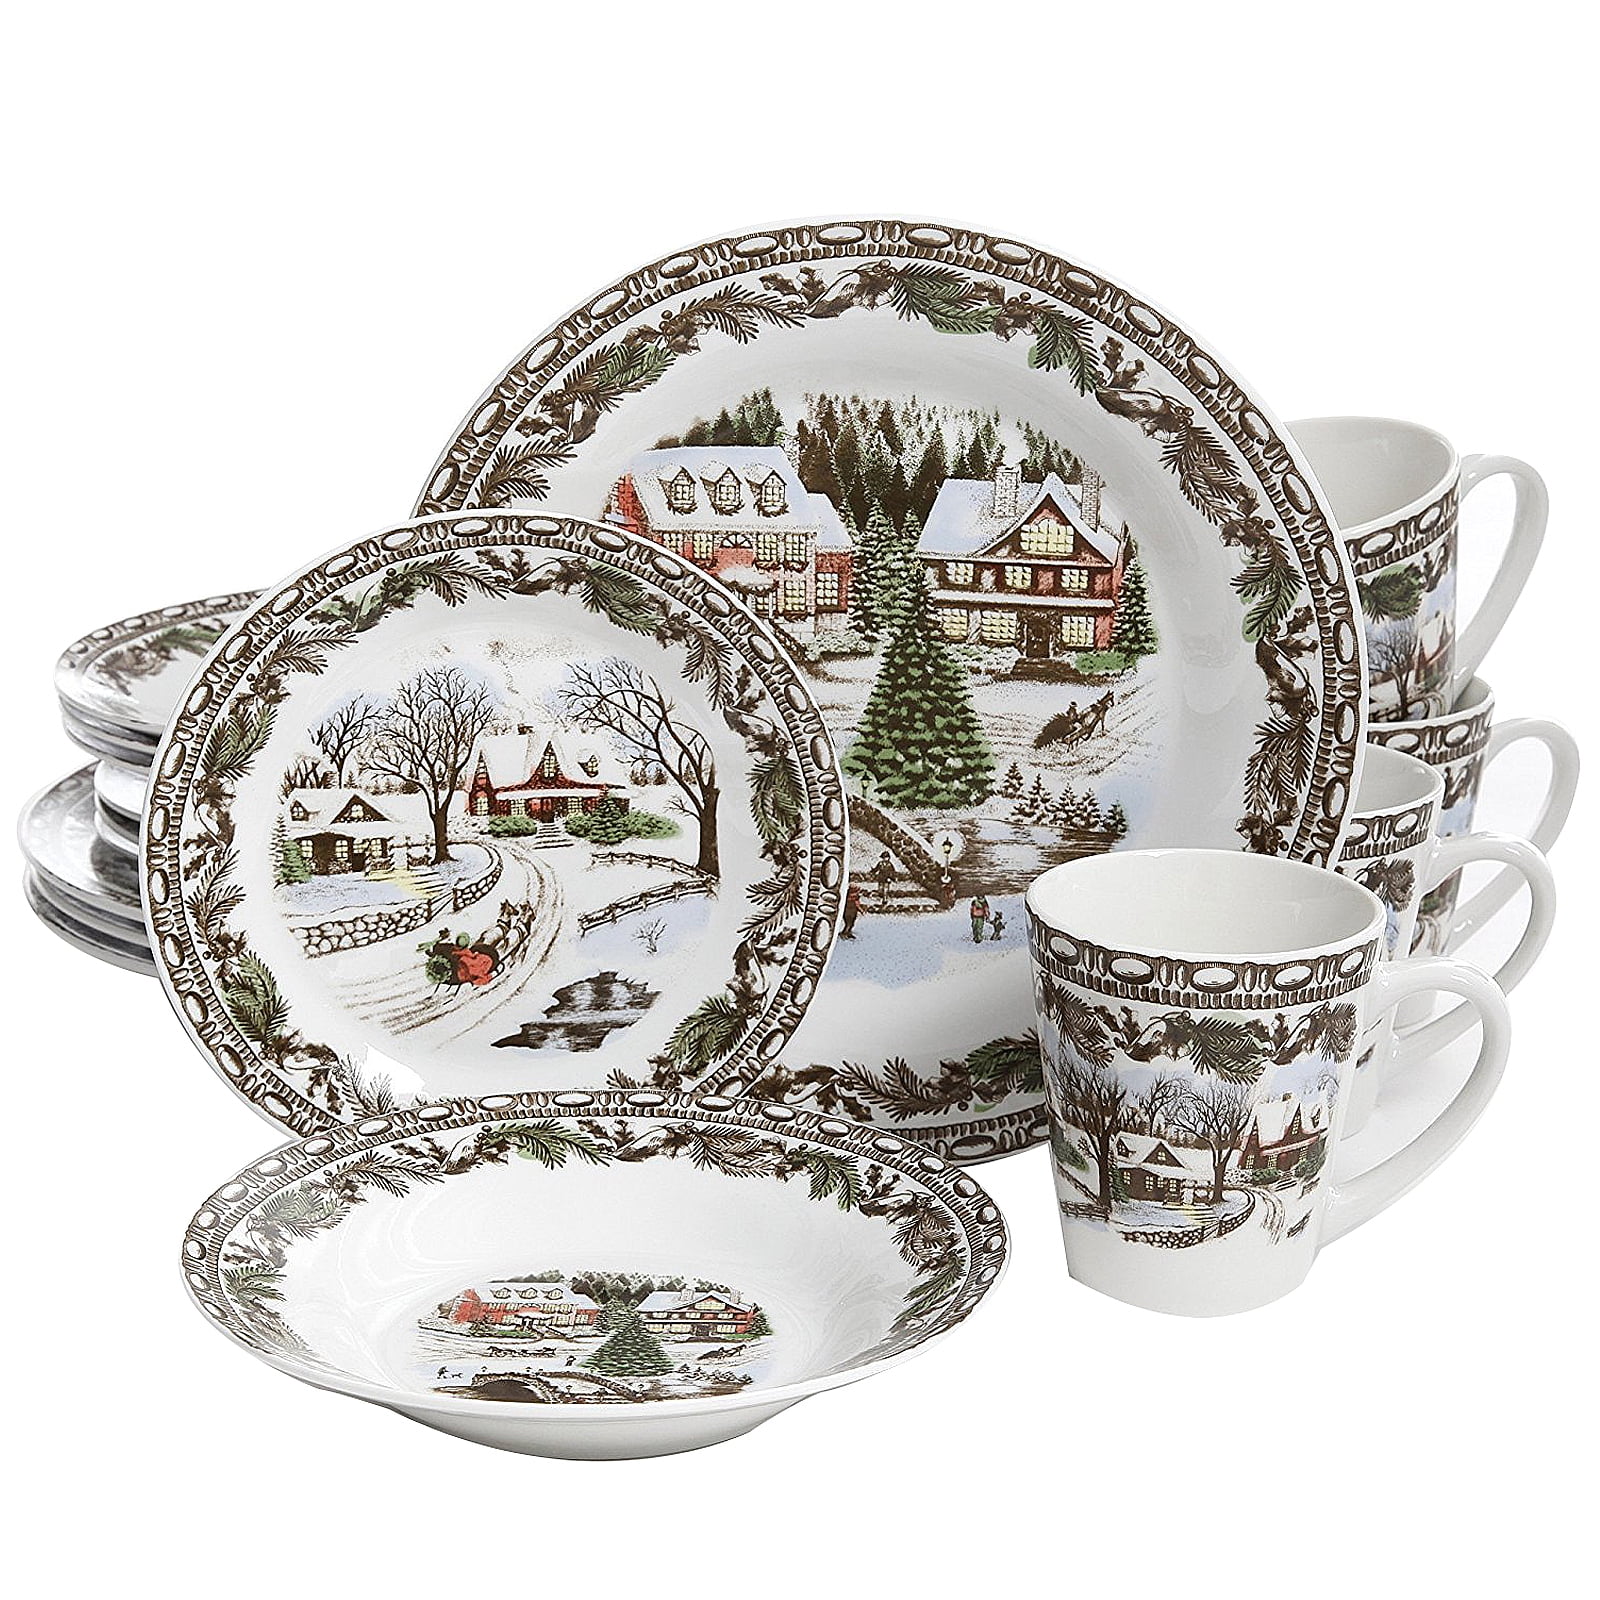 Details about   New MERRY BRITE  Christmas Dinnerware Dish Set 16 Piece Service For 4 